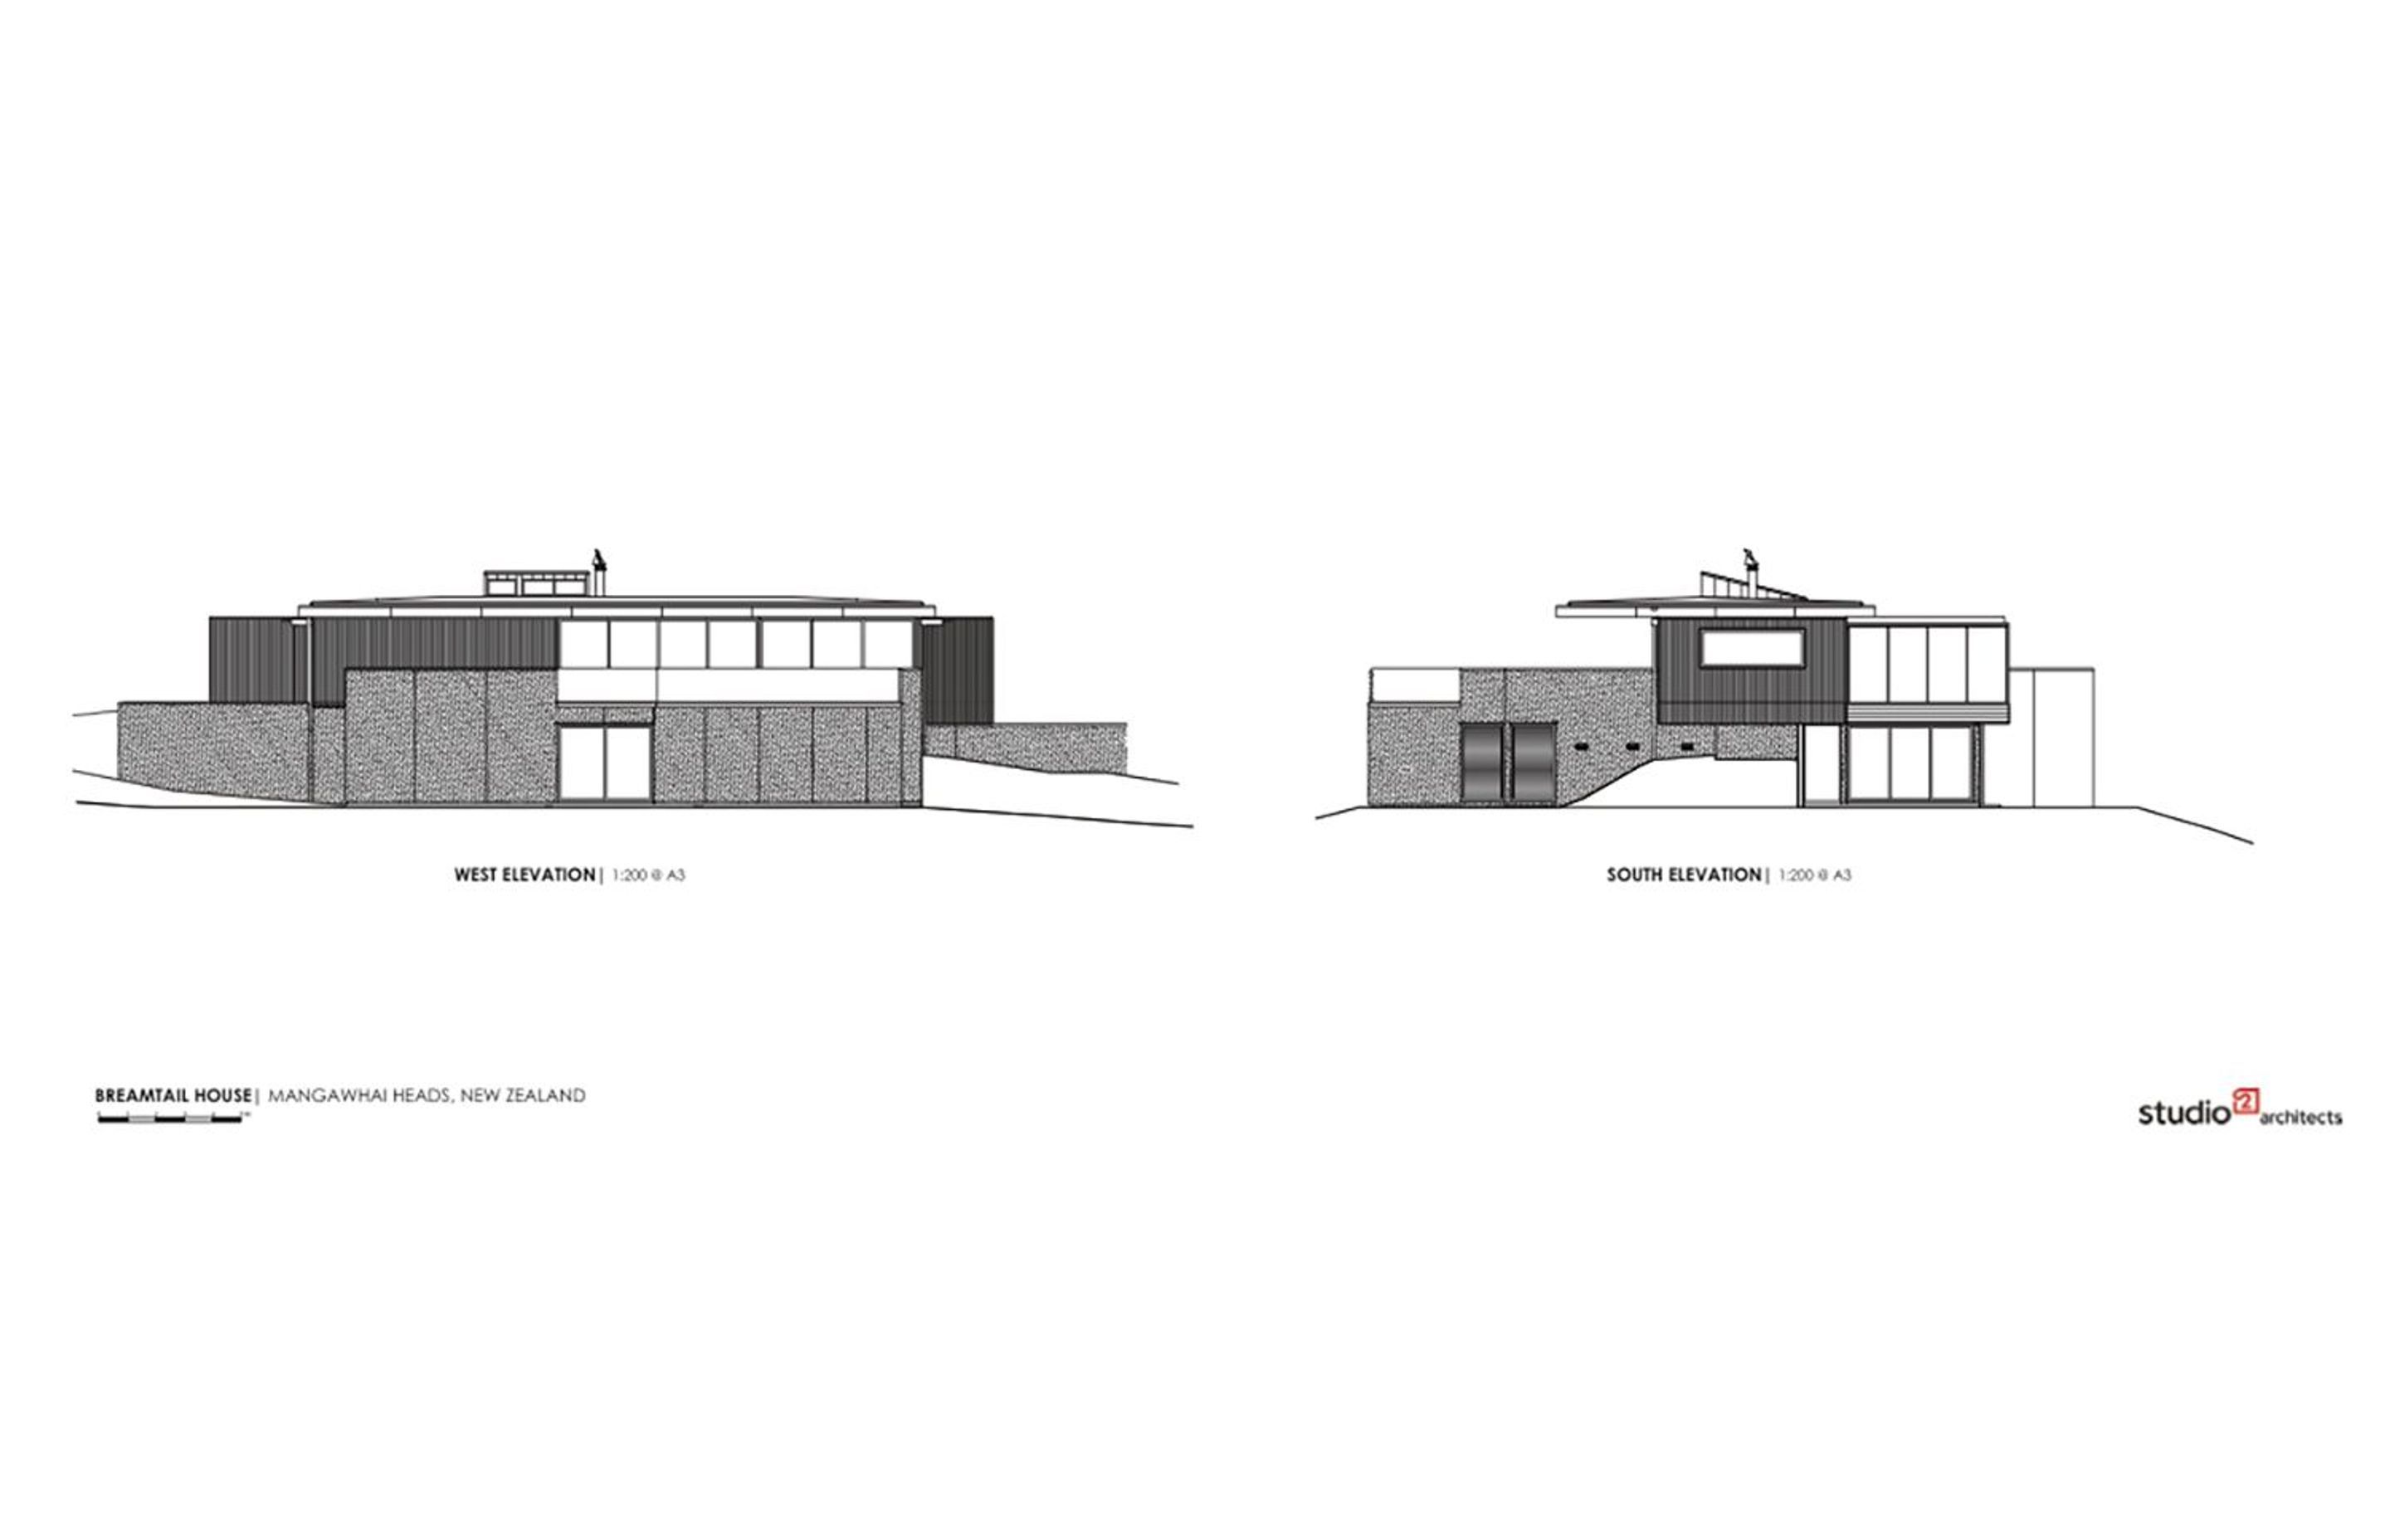 Breamtail House wast and east elevations by Studio2 Architects.